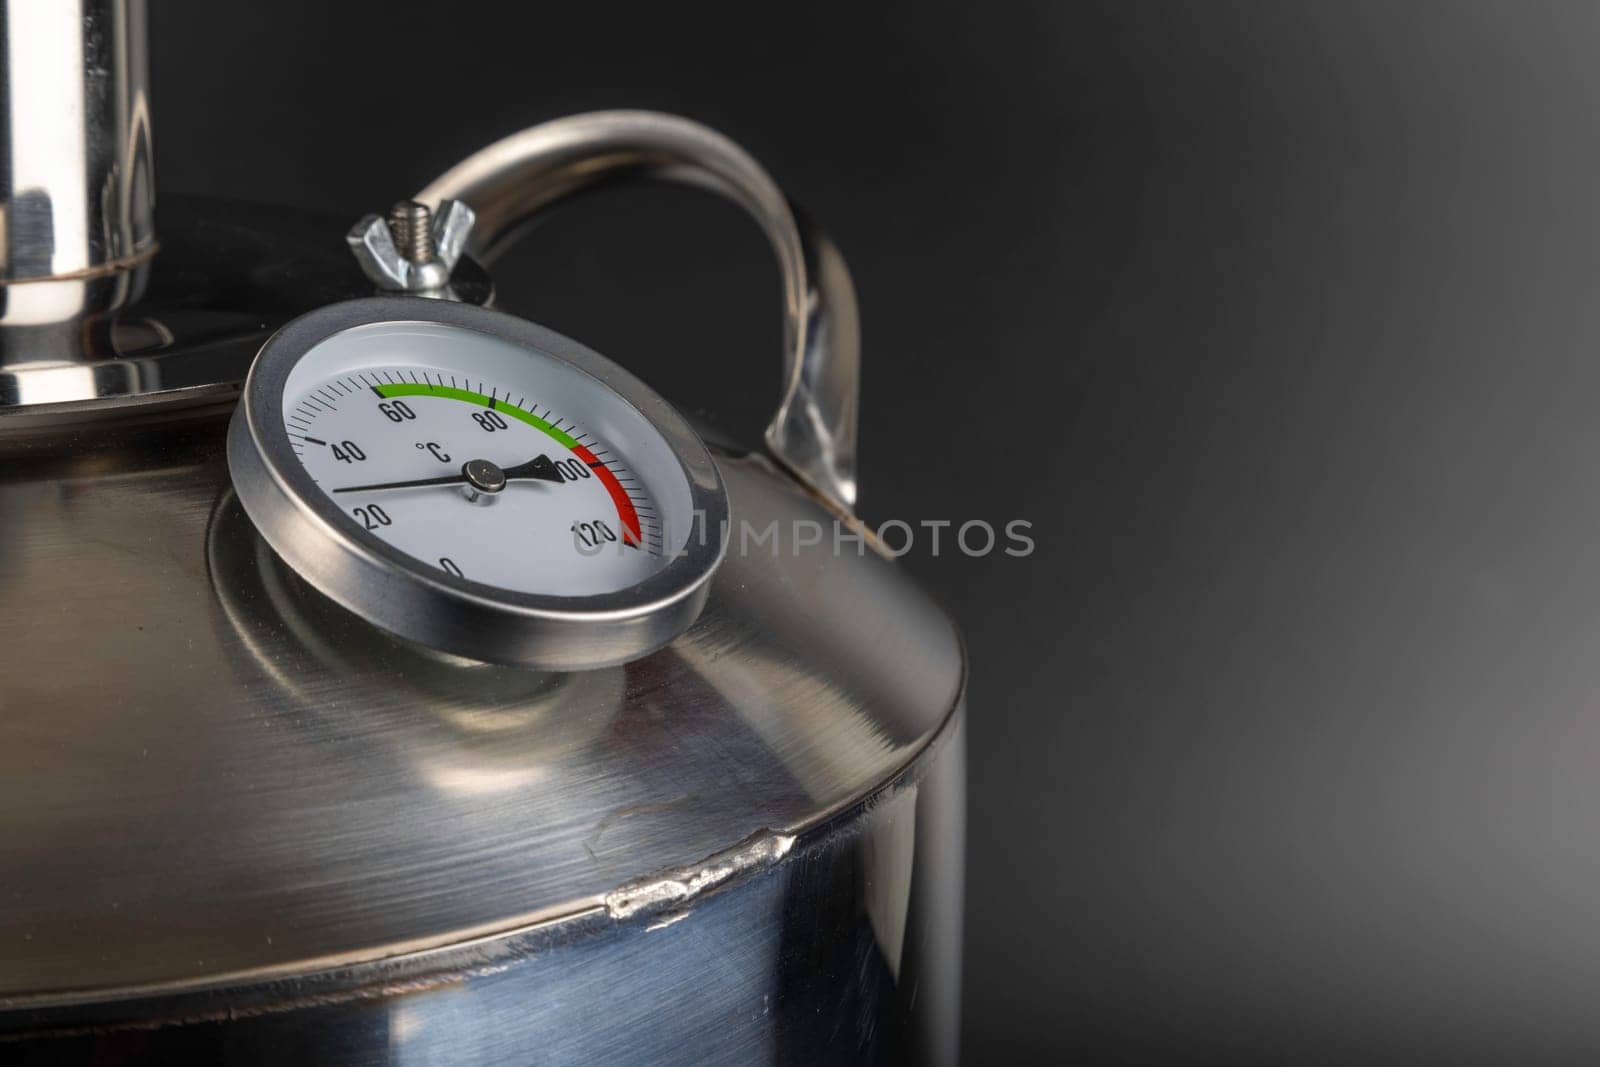 brand new stainless steel alcohol machine or moonshine still on black background.